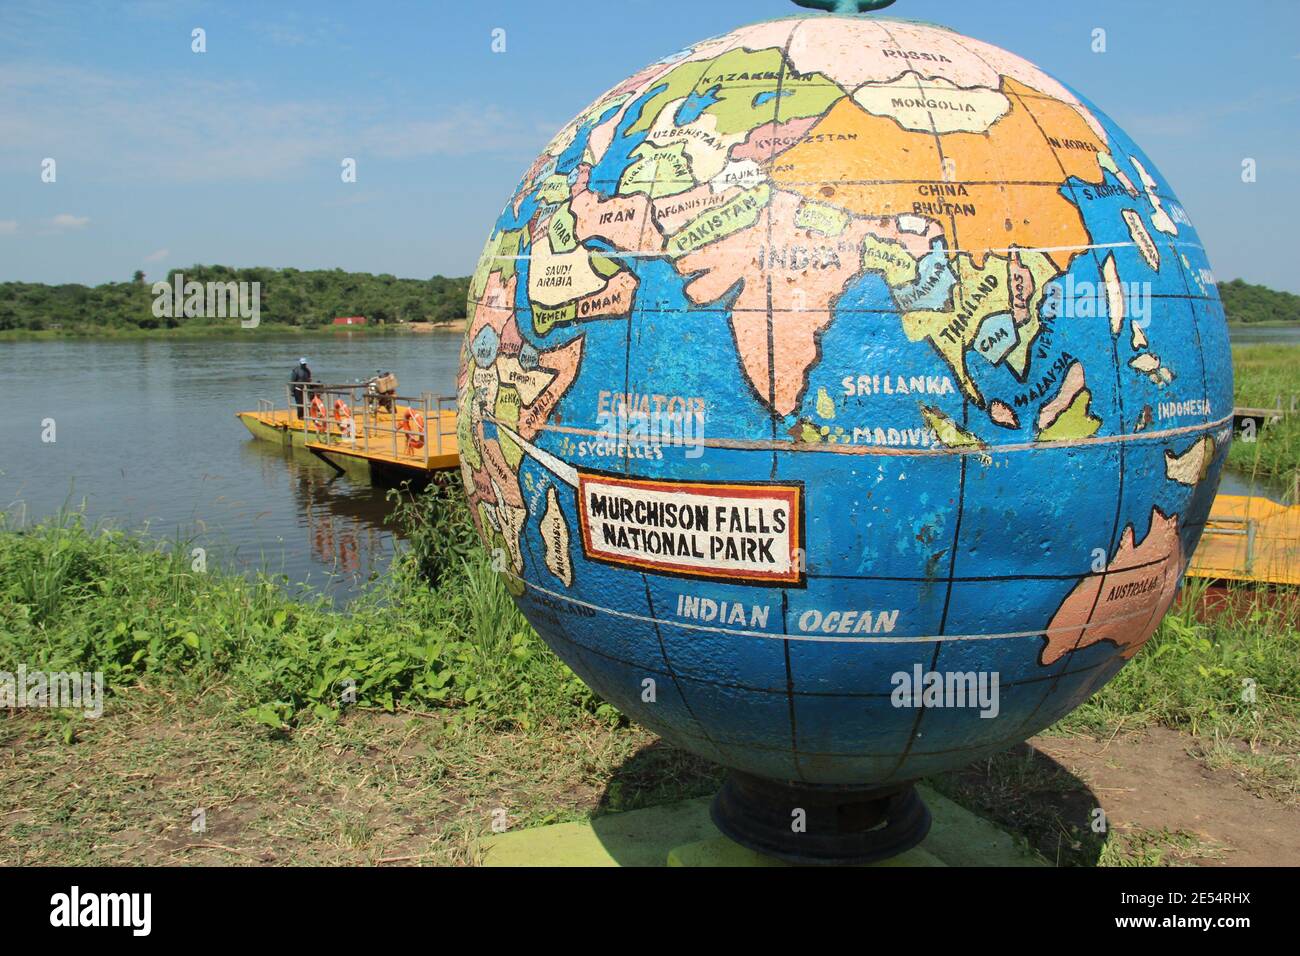 The Murchison Falls National Park globe on the banks of the Nile River in Uganda Stock Photo